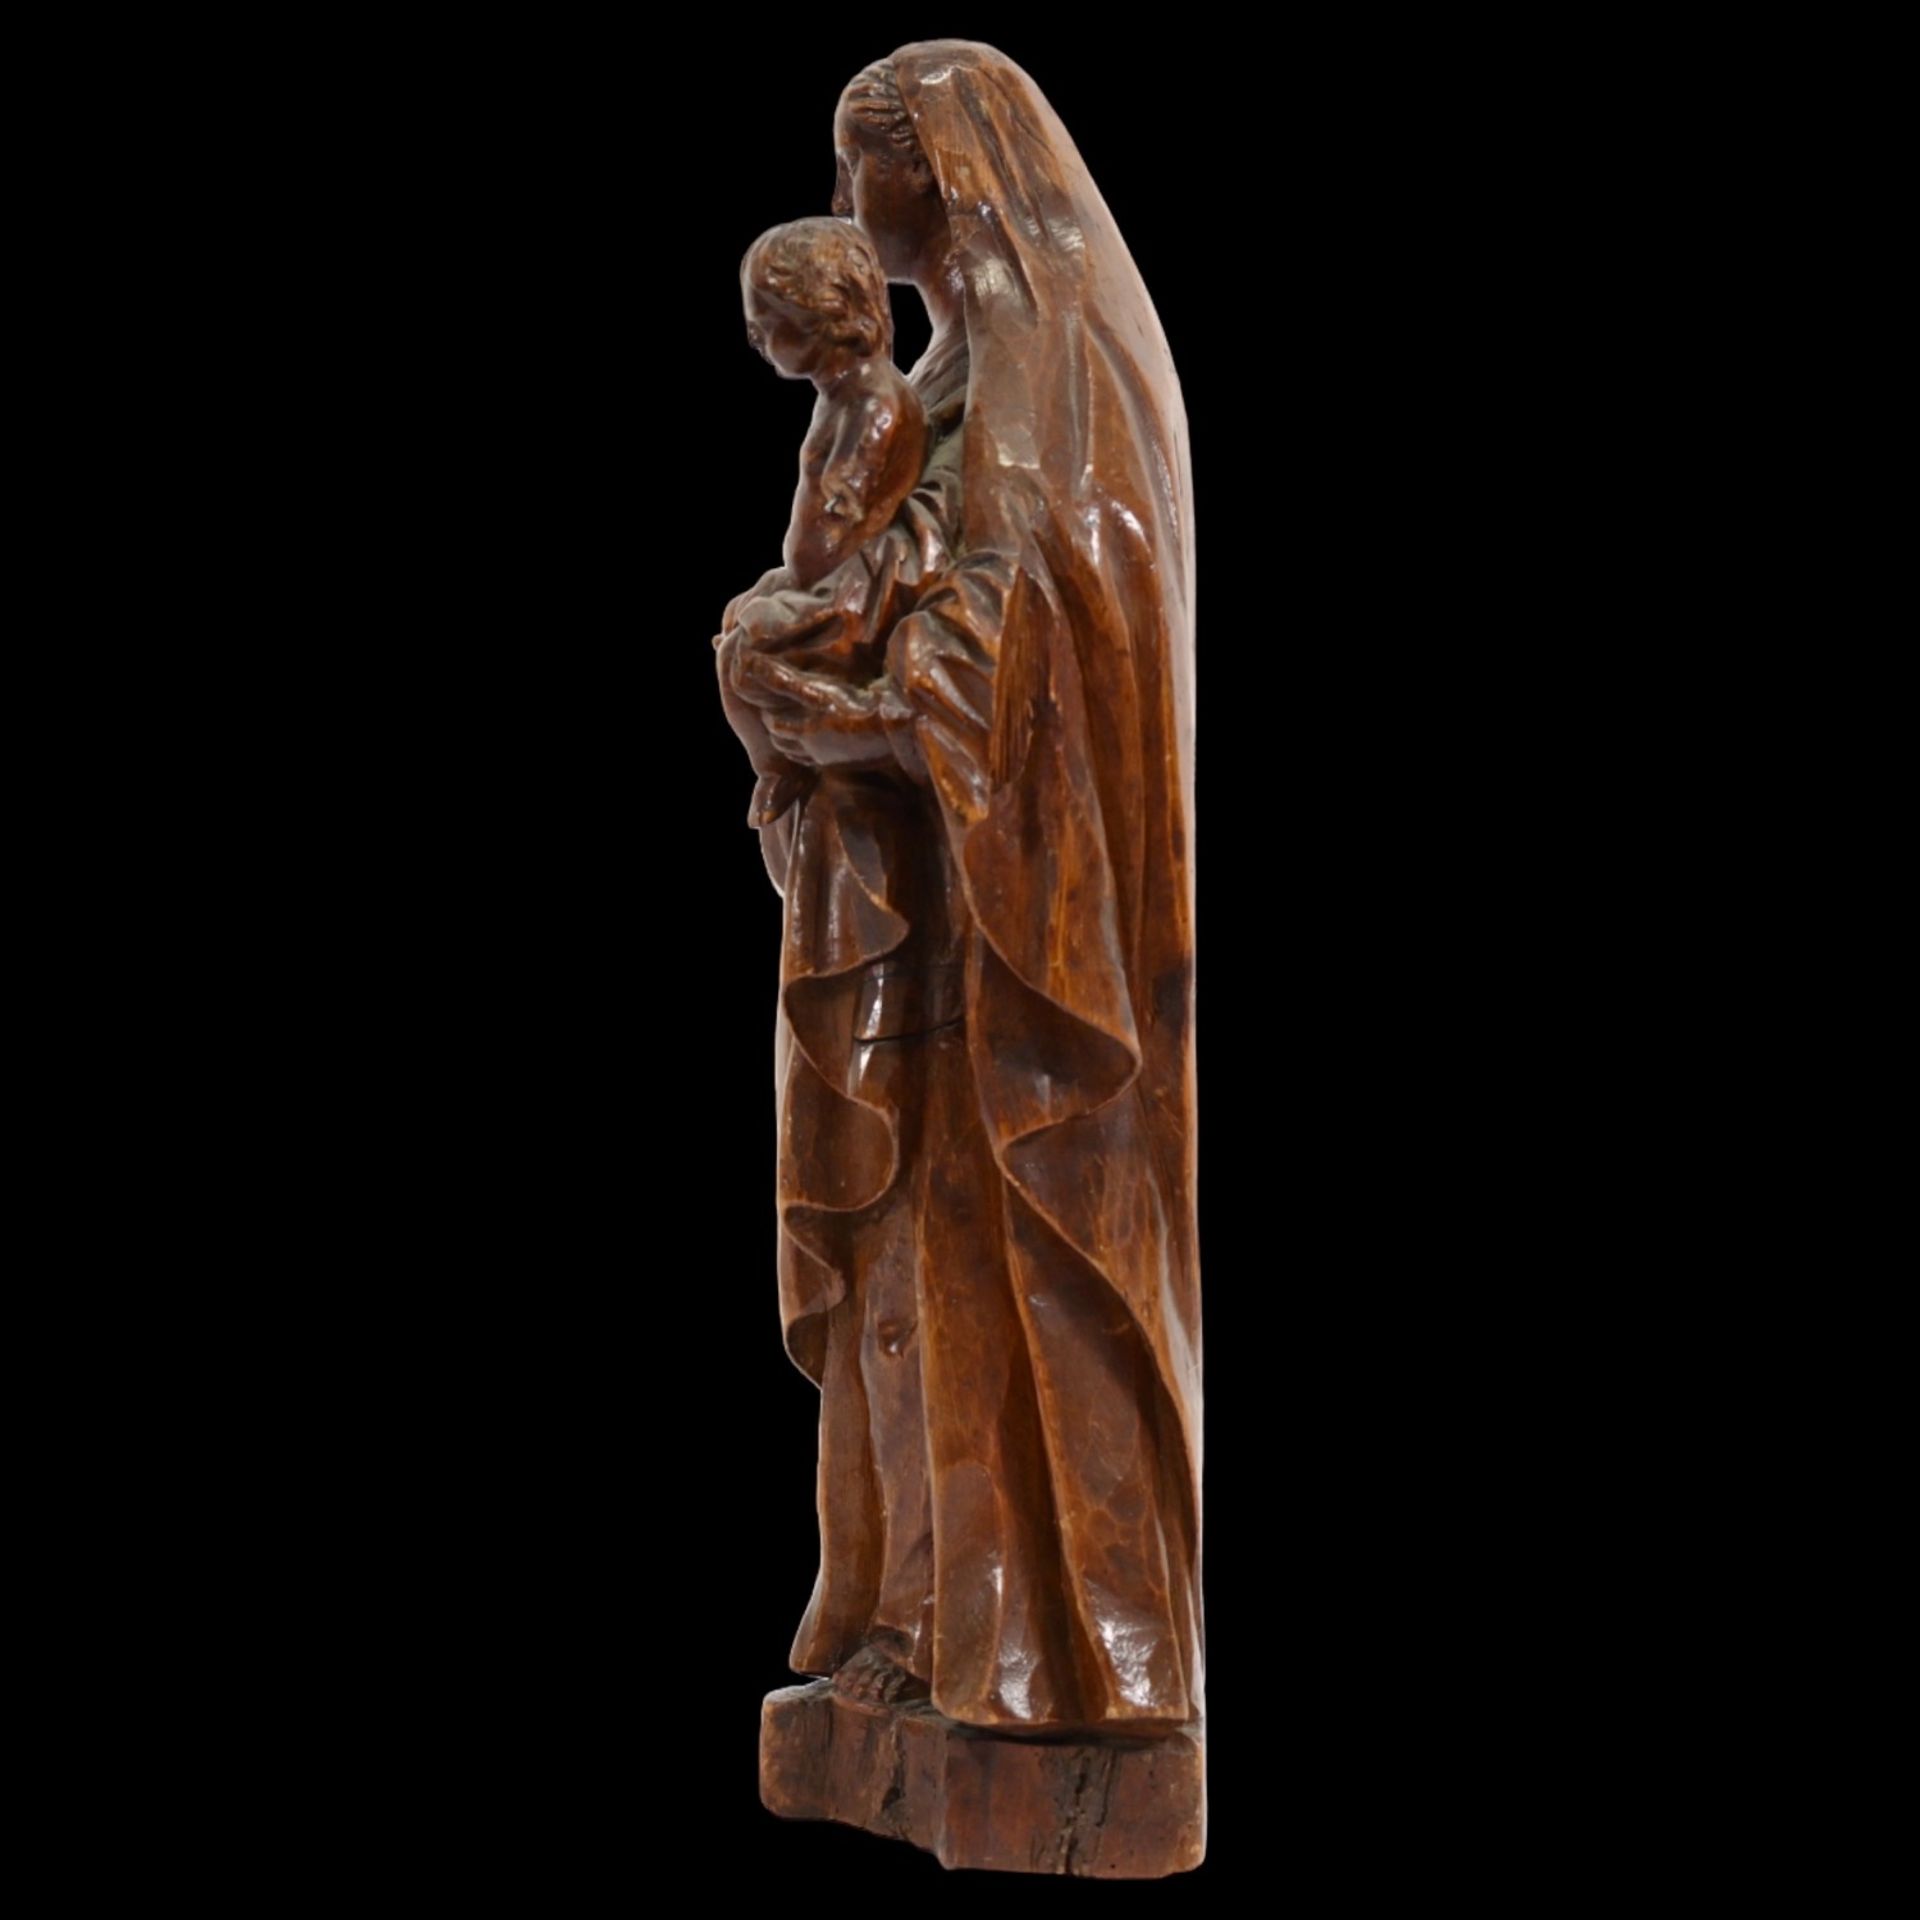 Magnificent Wooden sculpture, Virgin Mary with Child Jesus, France 19th century. - Image 3 of 8